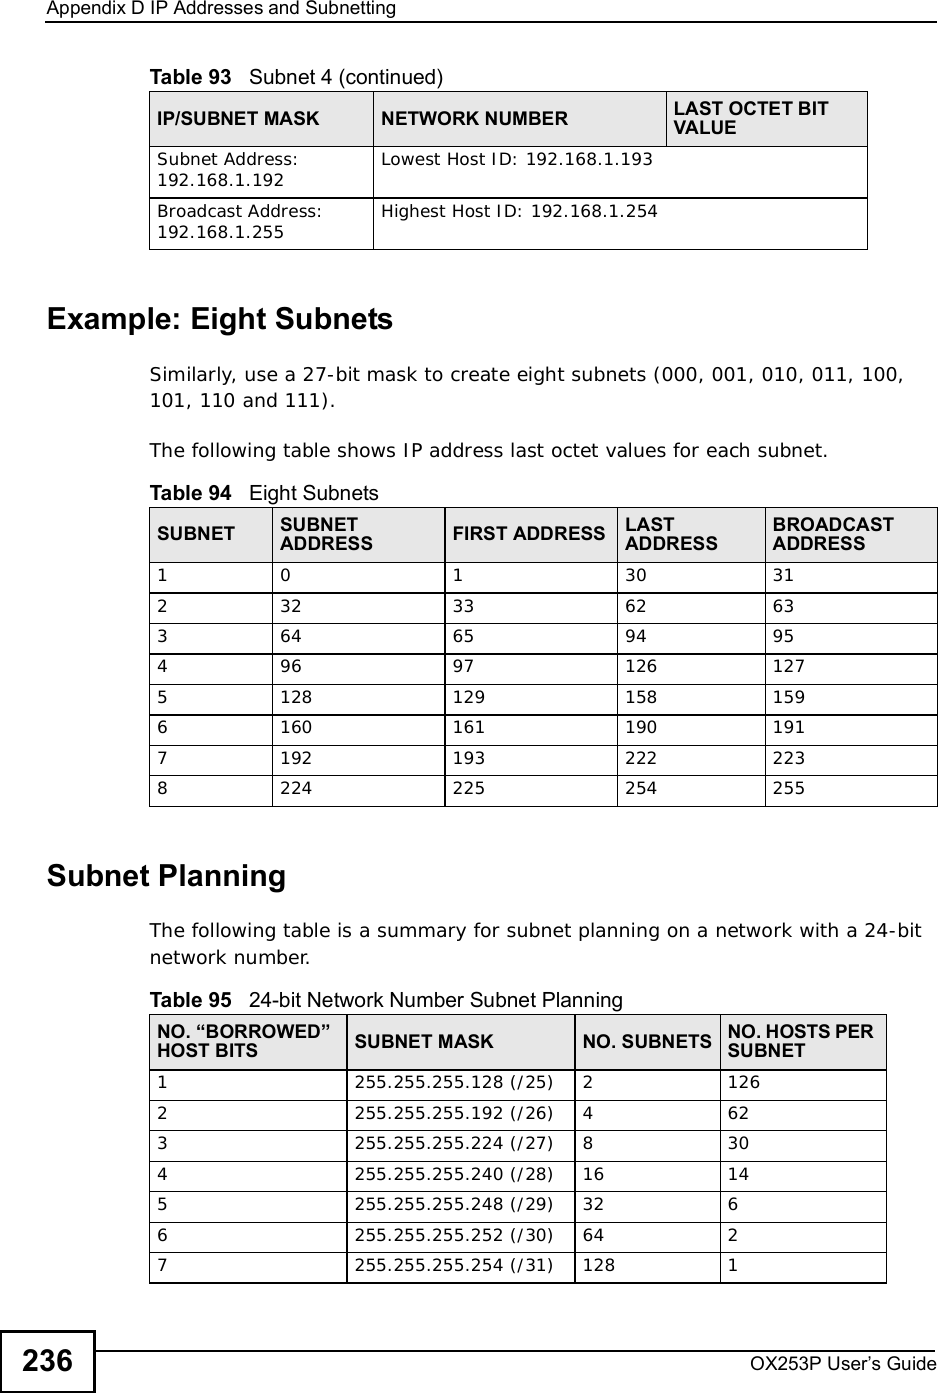 Appendix DIP Addresses and SubnettingOX253P User’s Guide236Example: Eight SubnetsSimilarly, use a 27-bit mask to create eight subnets (000, 001, 010, 011, 100, 101, 110 and 111). The following table shows IP address last octet values for each subnet.Subnet PlanningThe following table is a summary for subnet planning on a network with a 24-bit network number.Subnet Address: 192.168.1.192 Lowest Host ID: 192.168.1.193Broadcast Address: 192.168.1.255 Highest Host ID: 192.168.1.254Table 93   Subnet 4 (continued)IP/SUBNET MASK NETWORK NUMBER LAST OCTET BIT VALUETable 94   Eight SubnetsSUBNET SUBNET ADDRESS FIRST ADDRESS LAST ADDRESSBROADCAST ADDRESS10130 312 32 33 62 633 64 65 94 954 96 97 126 1275 128 129 158 1596 160 161 190 1917 192 193 222 2238 224 225 254 255Table 95   24-bit Network Number Subnet PlanningNO. “BORROWED” HOST BITS SUBNET MASK NO. SUBNETS NO. HOSTS PER SUBNET1255.255.255.128 (/25) 2 1262 255.255.255.192 (/26) 4 623 255.255.255.224 (/27) 8 304 255.255.255.240 (/28) 16 145 255.255.255.248 (/29) 32 66 255.255.255.252 (/30) 64 27 255.255.255.254 (/31) 128 1